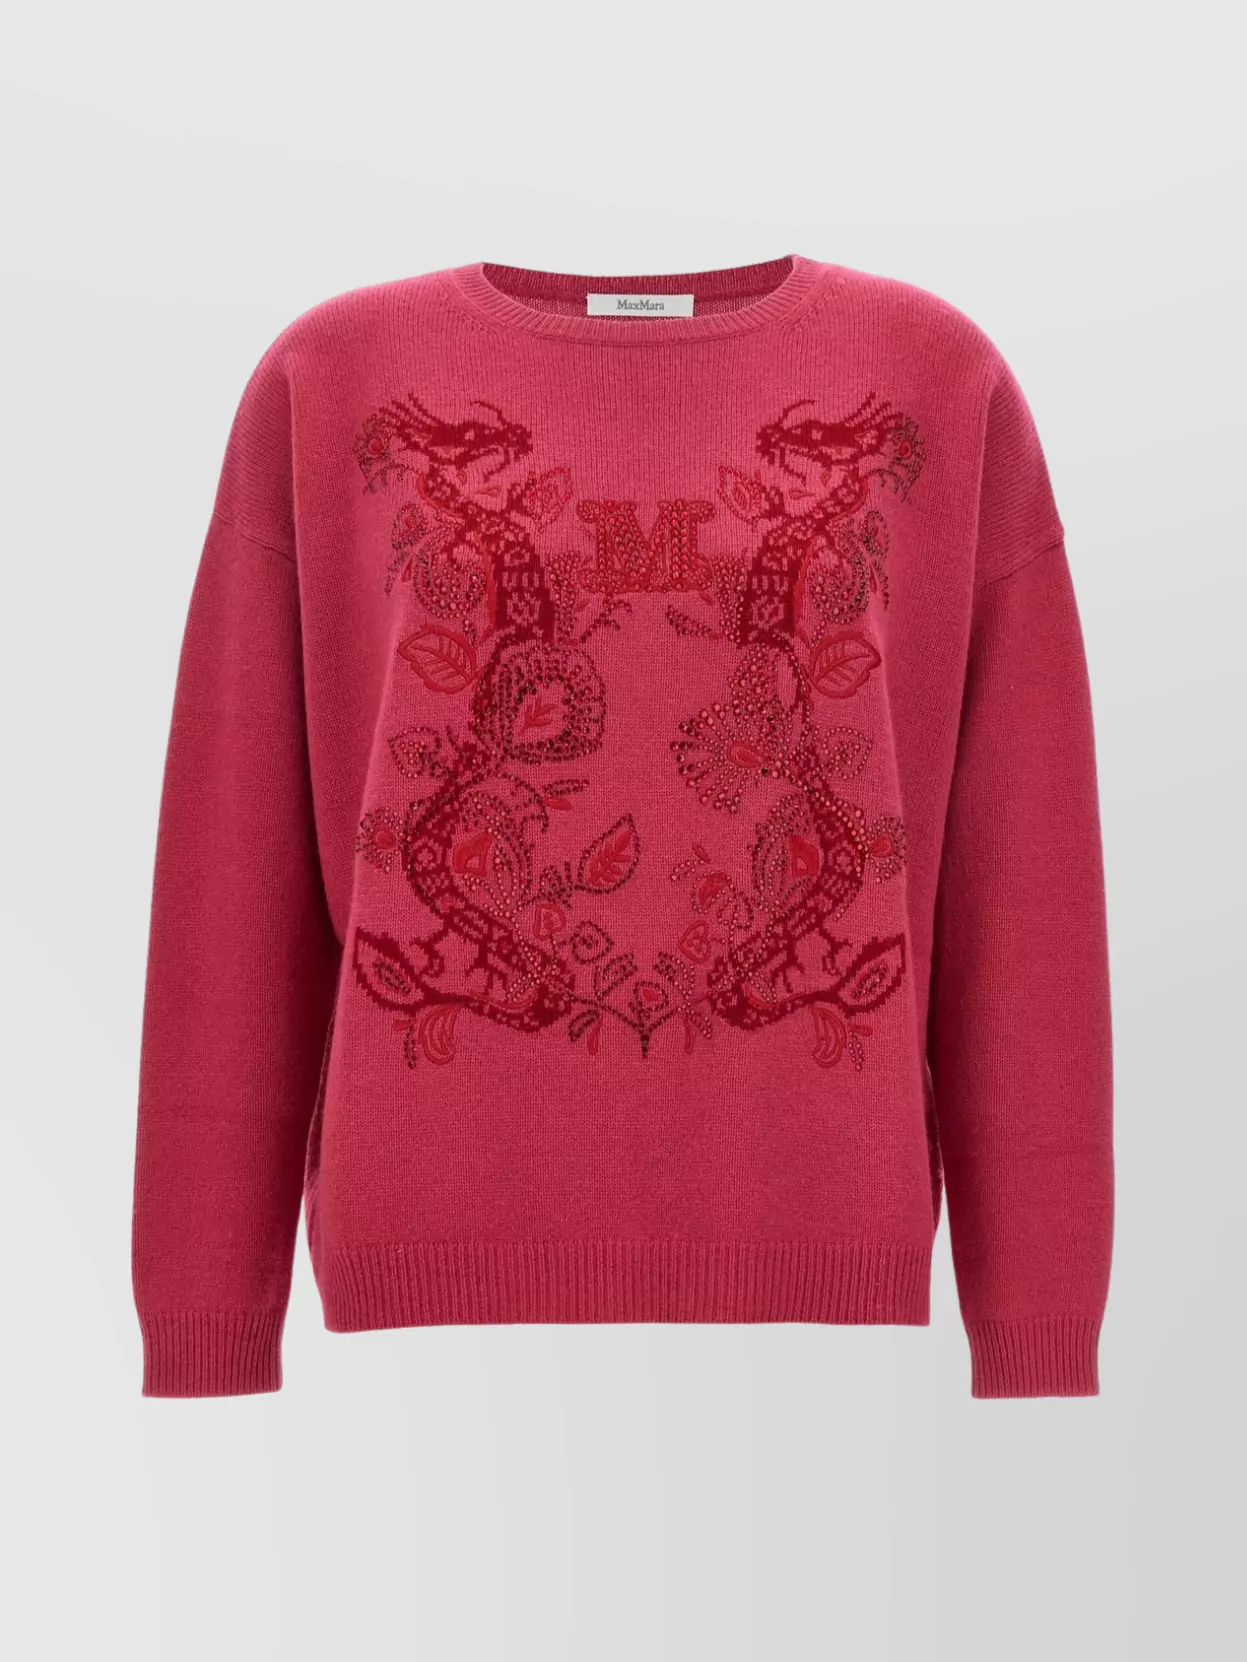 Max Mara Dragon Motif Crew Neck Sweater With Beaded Embellishments In Red